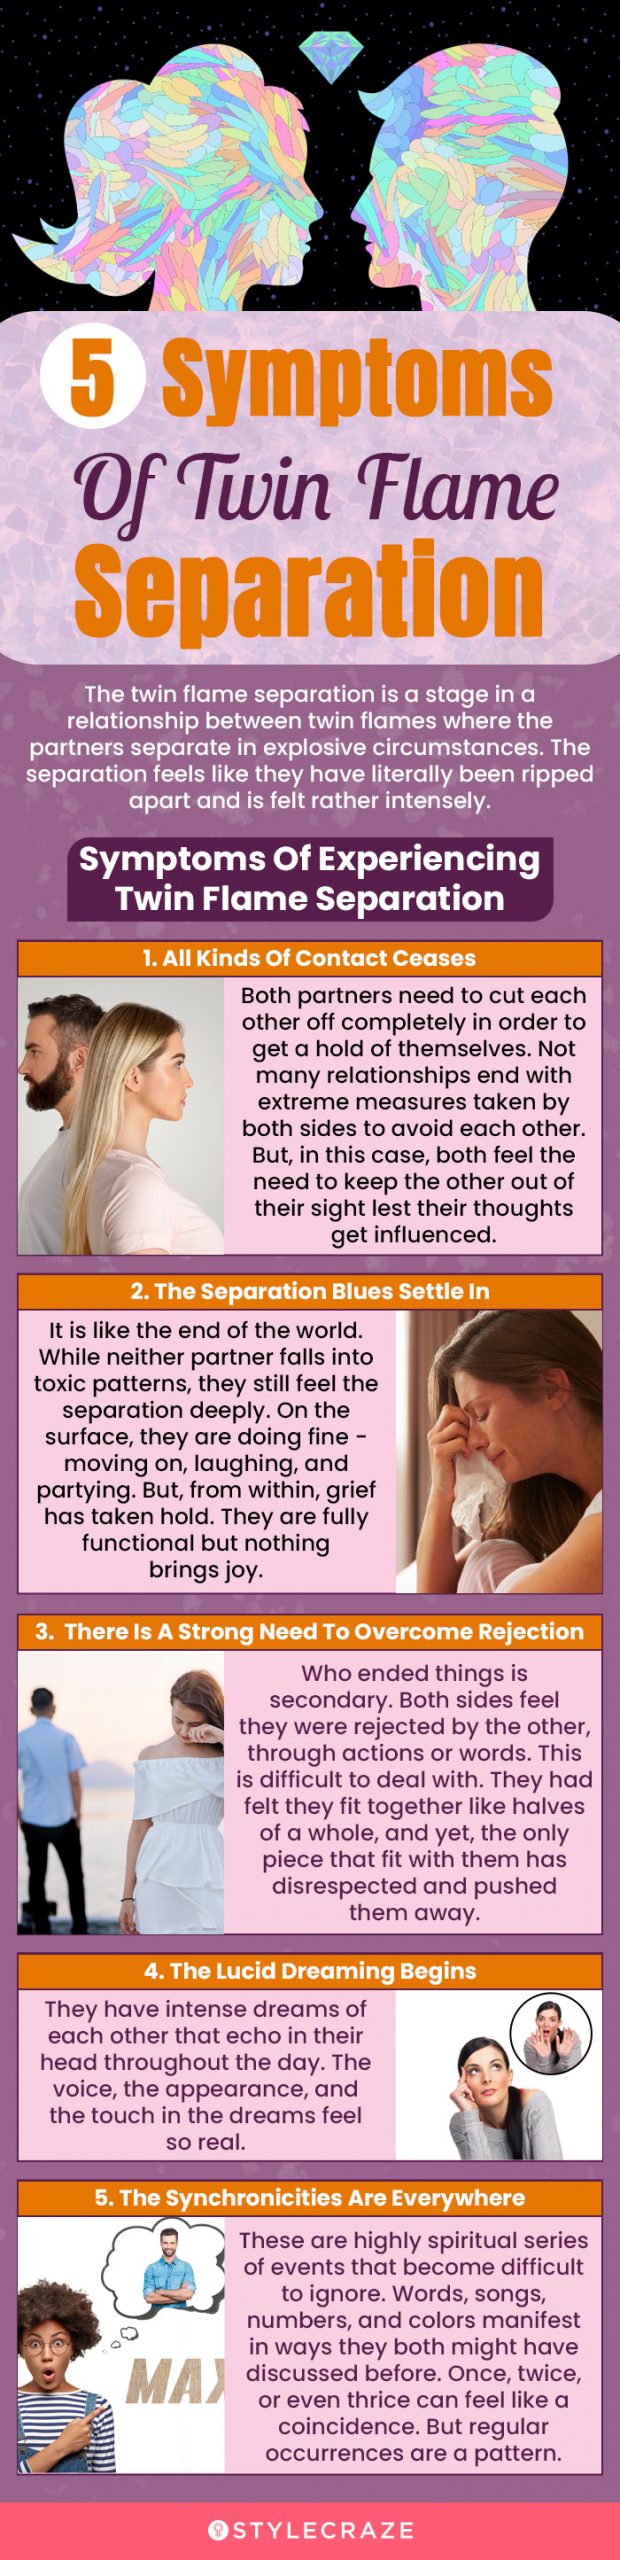 5 symptoms of twin flame separation (infographic)